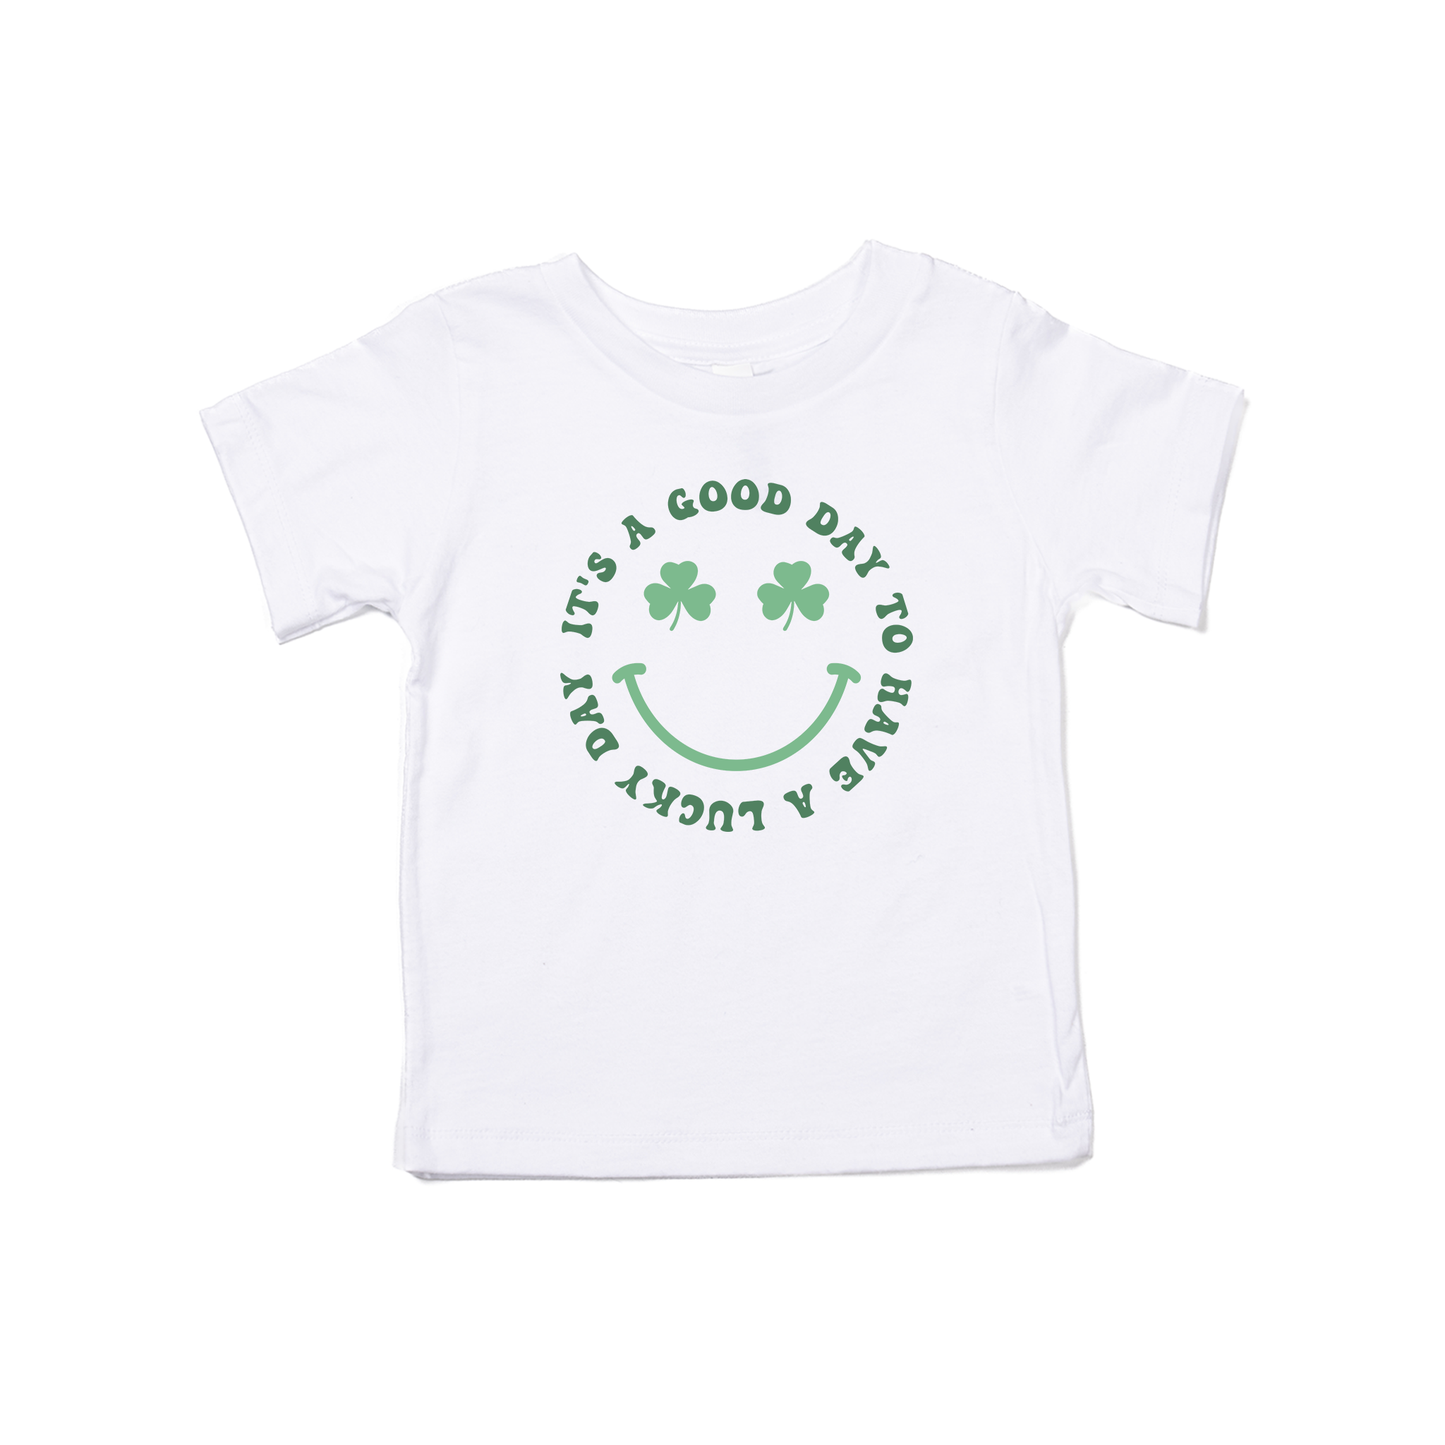 It's a good day to have a Lucky day (St. Patrick's) - Kids Tee (White)